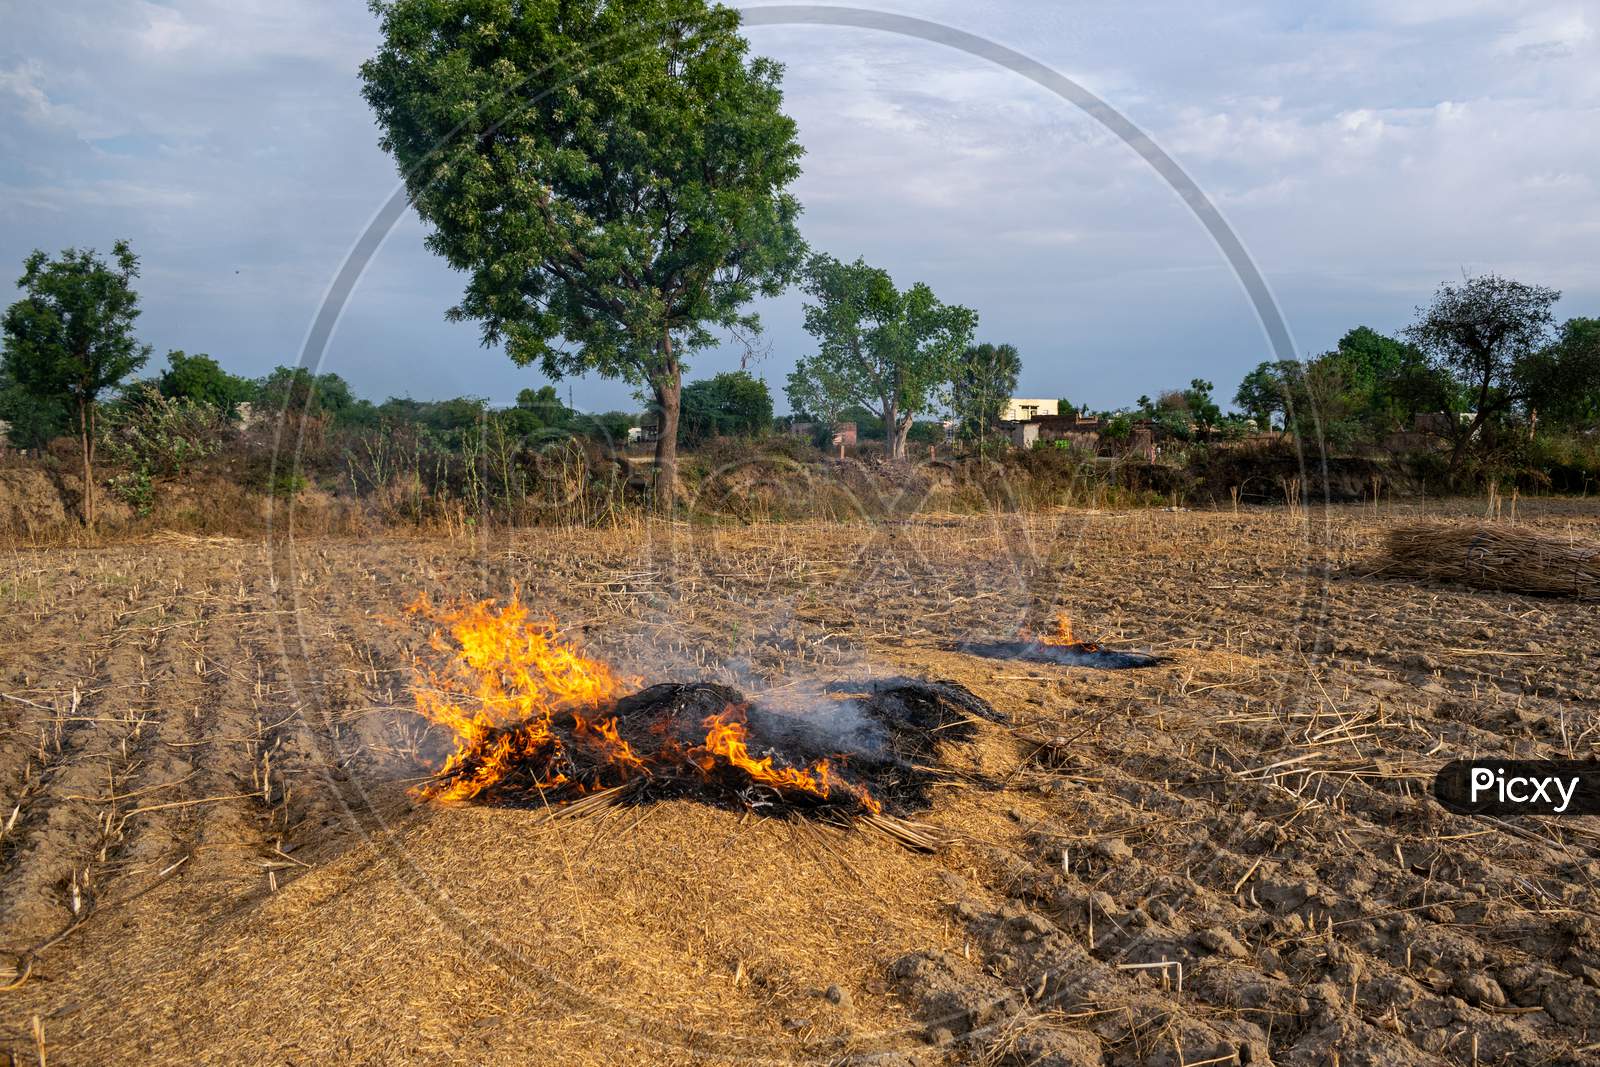 farm debris is being burnt by a farmer after harvesting of crops in a village